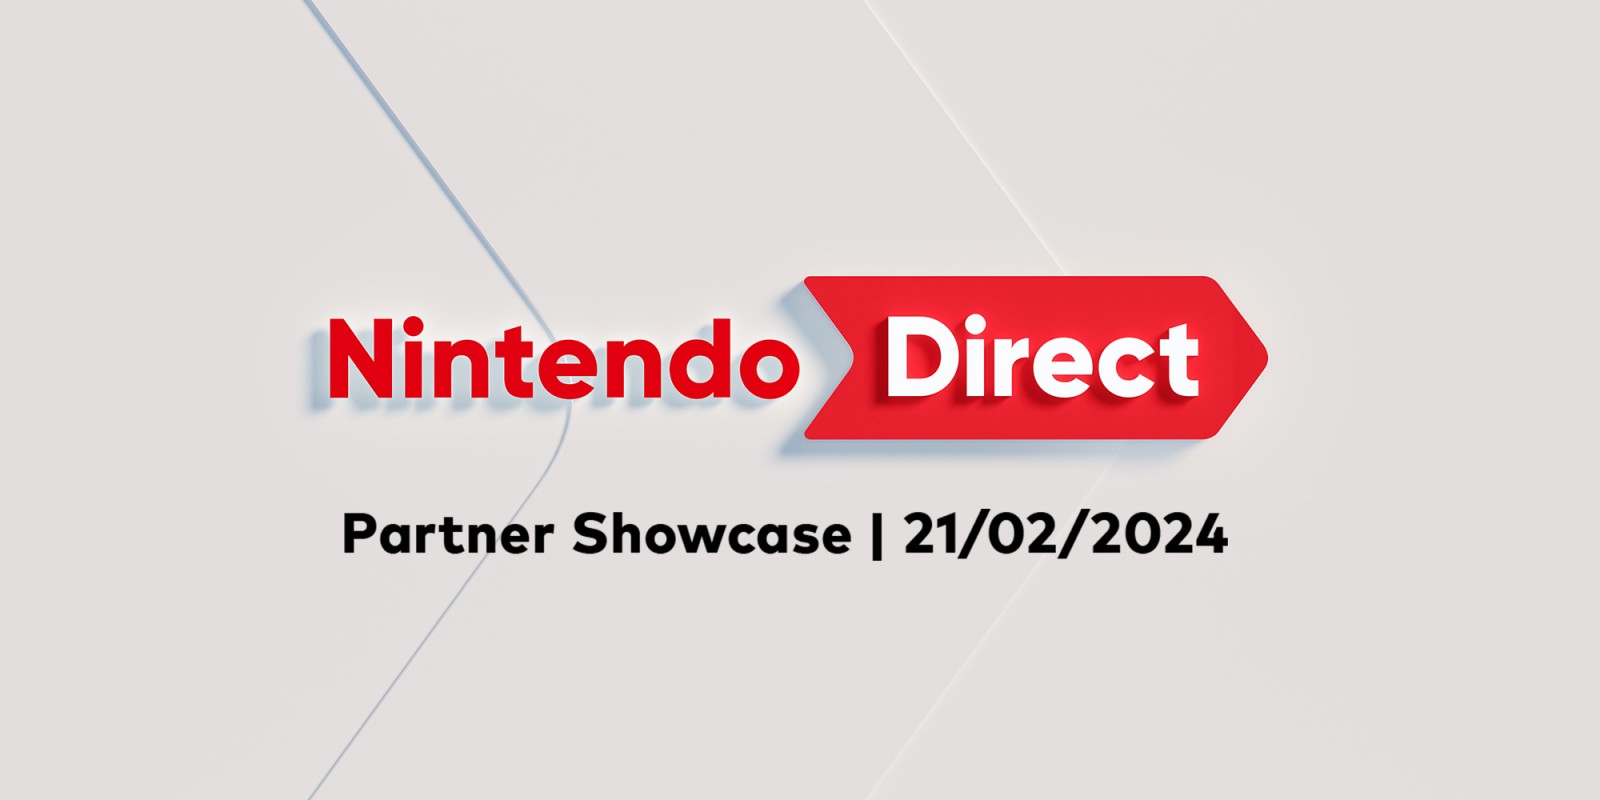 How to watch Nintendo Direct: February 21, 2024